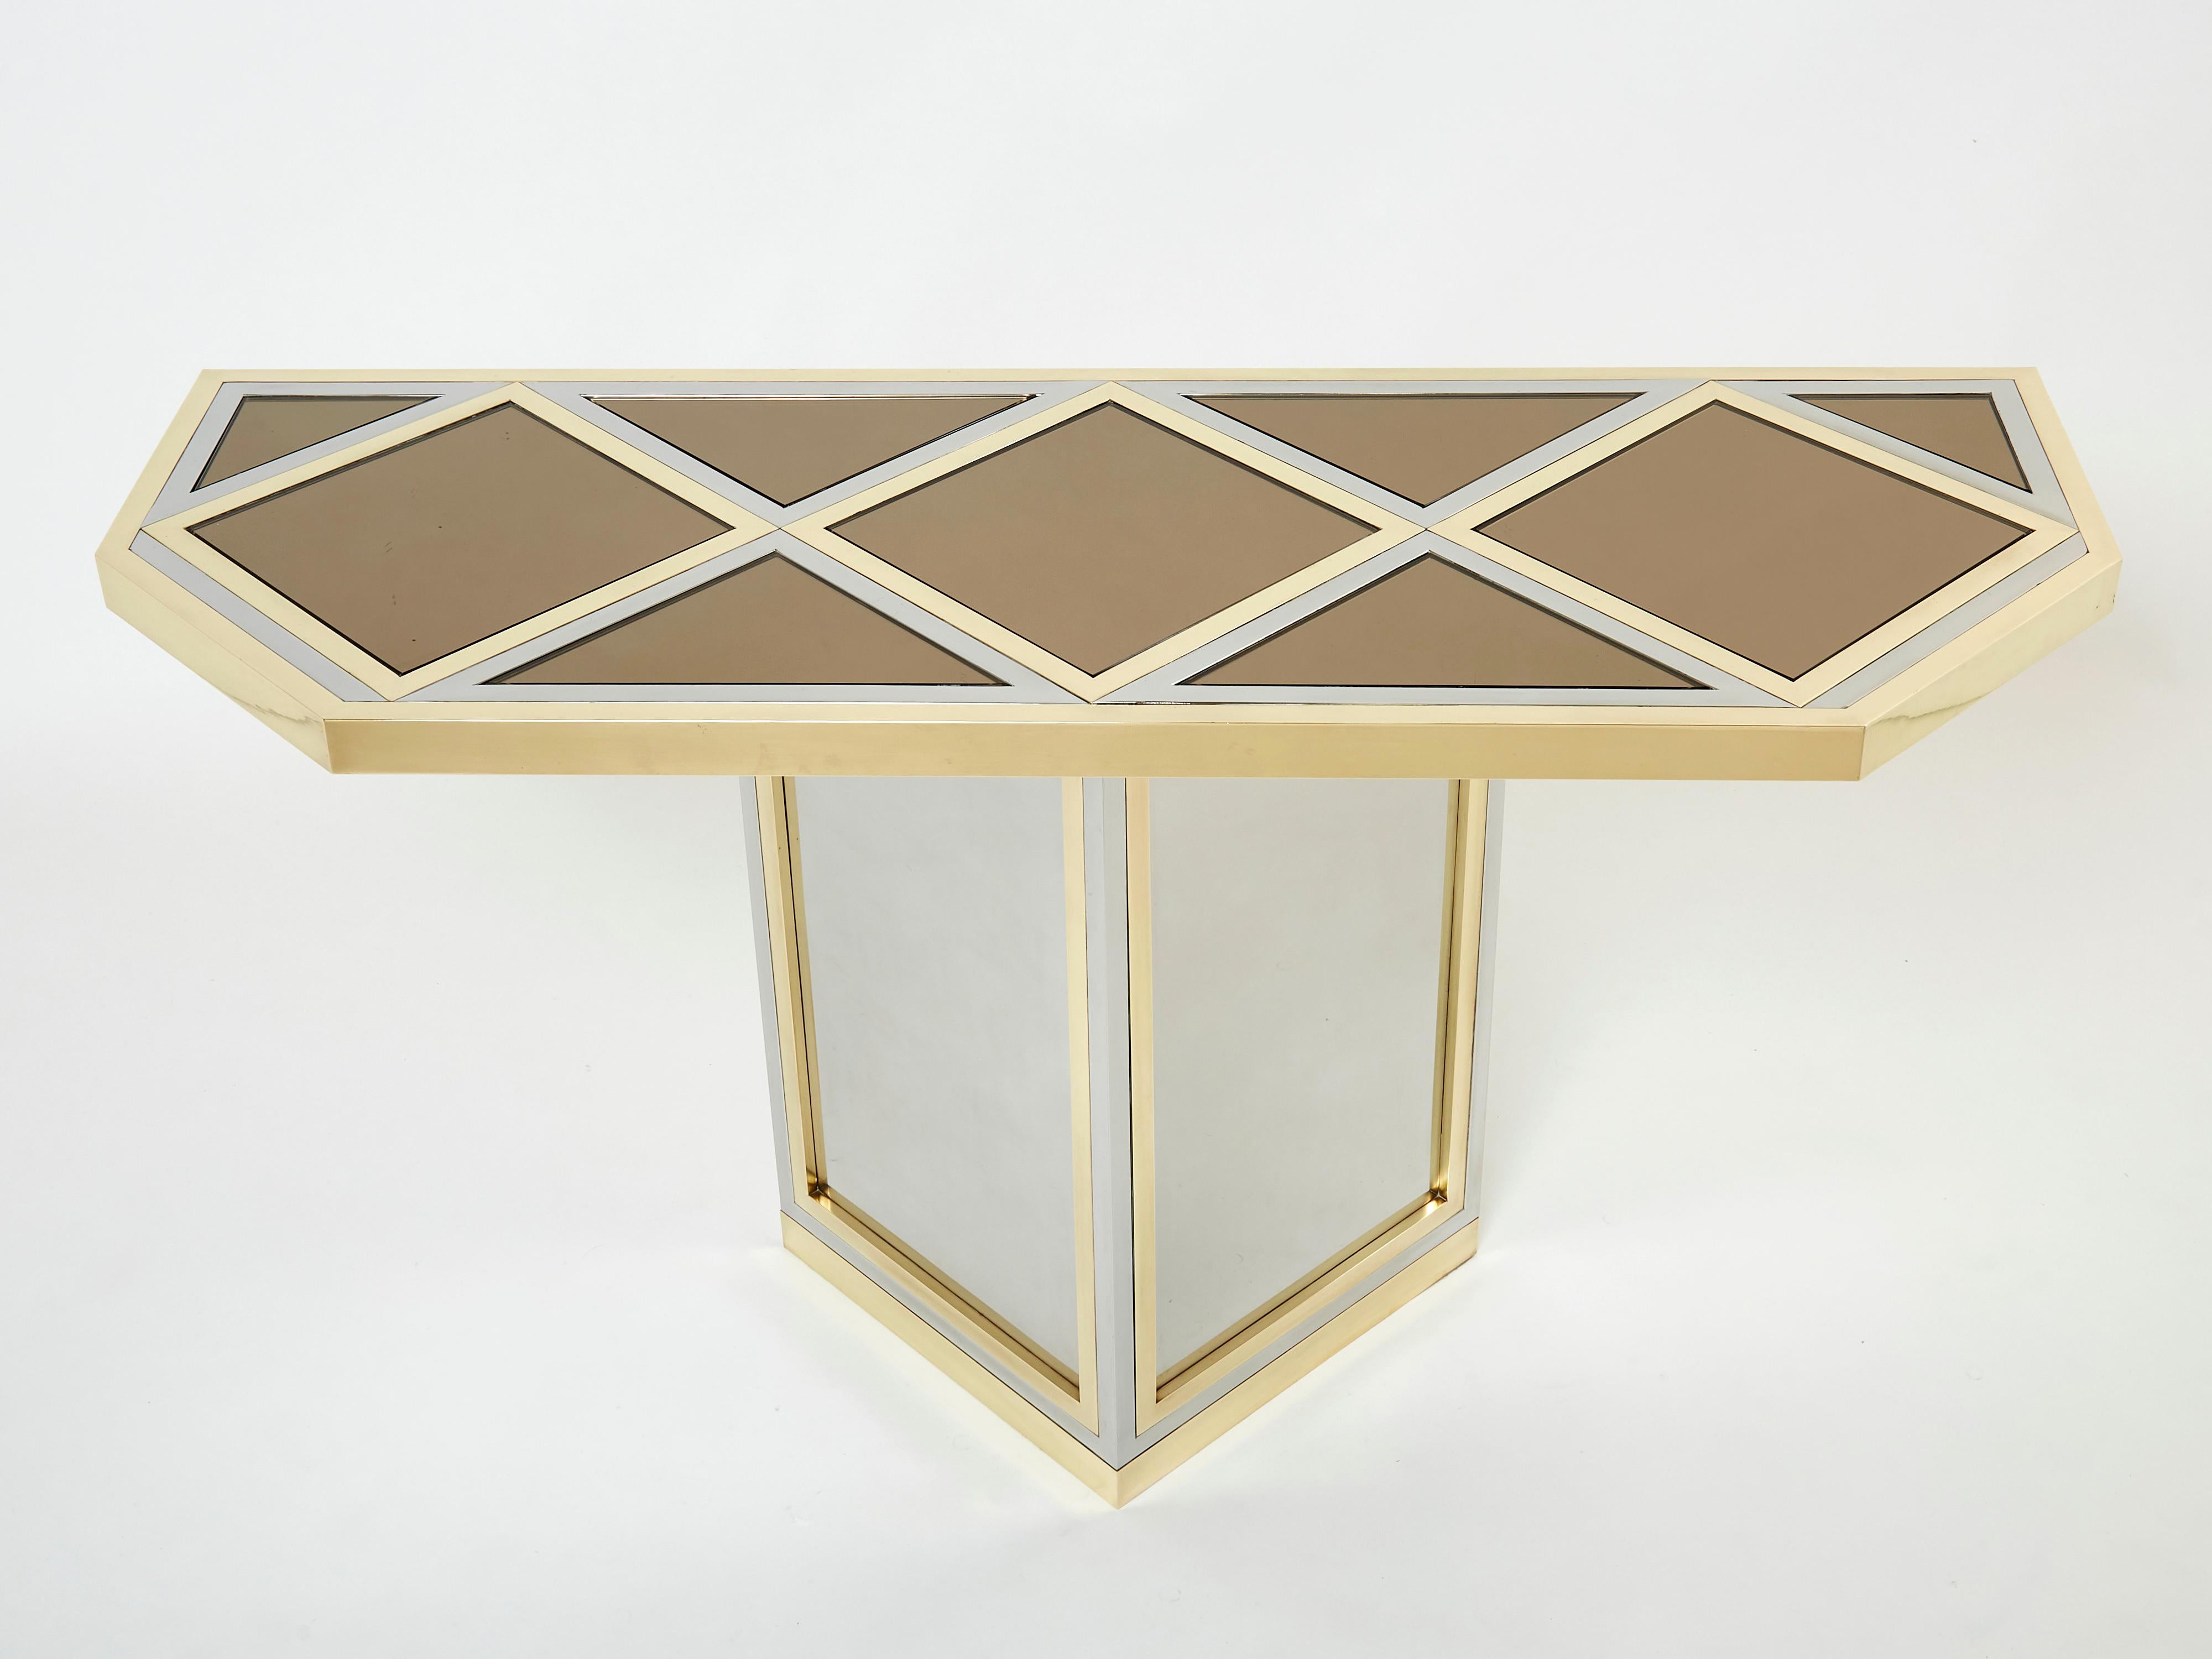 A beautiful piece of design, this console table deserves to be the focal point of your entrance or living room. Symmetrical brass and chrome elements strike through a geometrical smoked mirror top, the result being an impressively sleek decorative